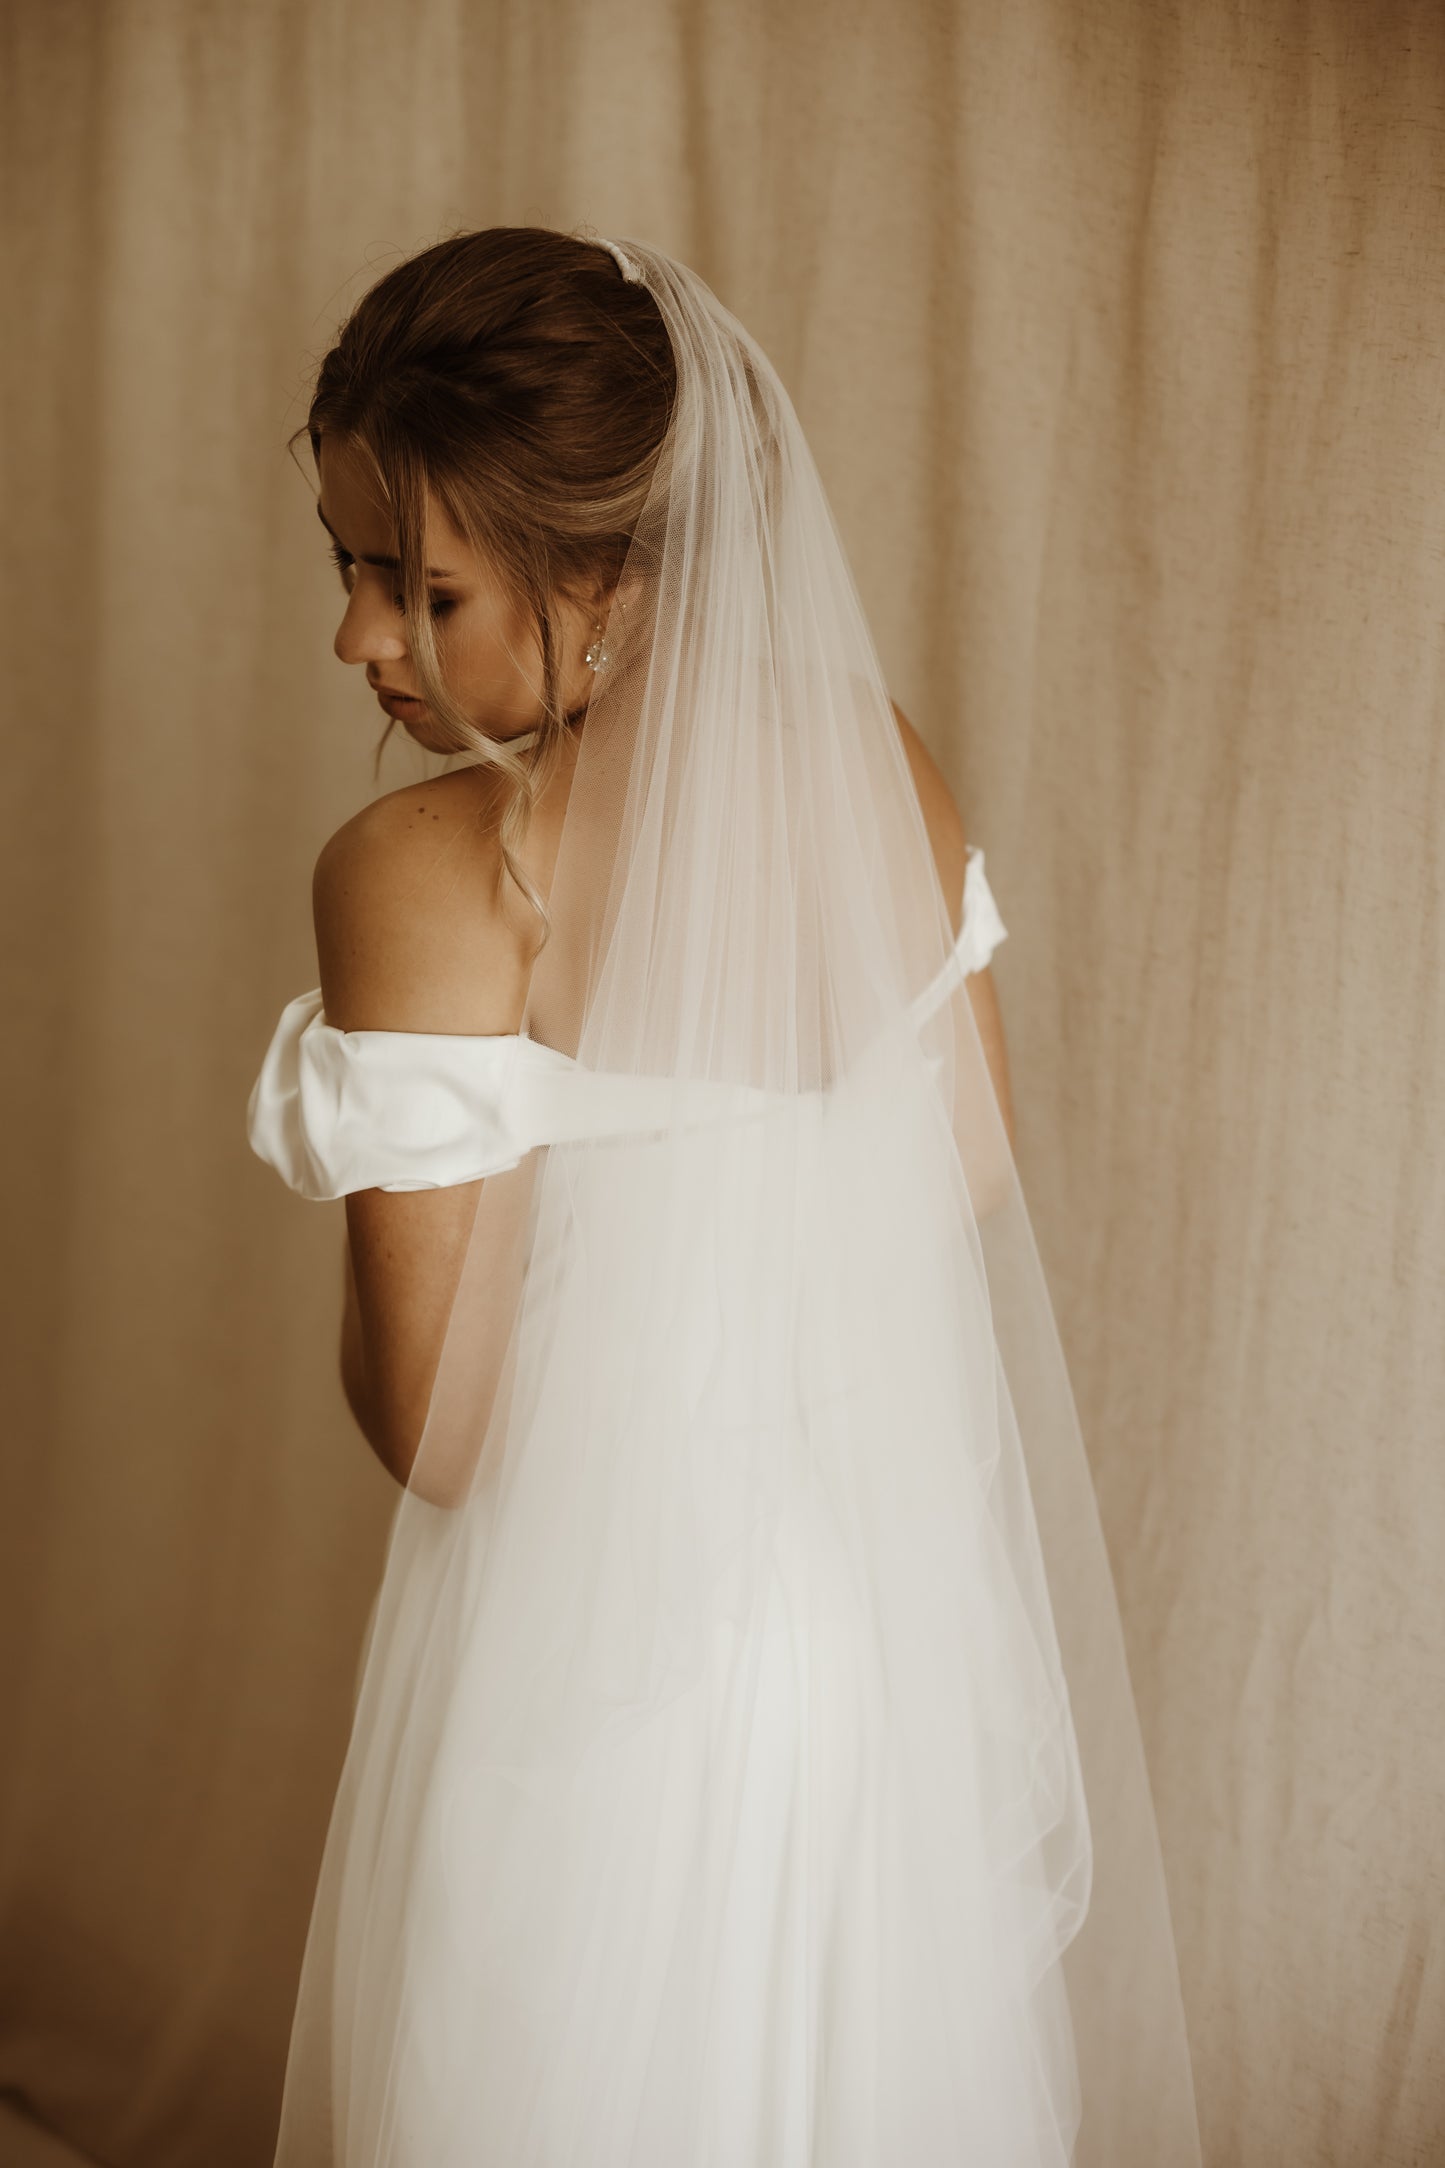 Personalized Printed Veil